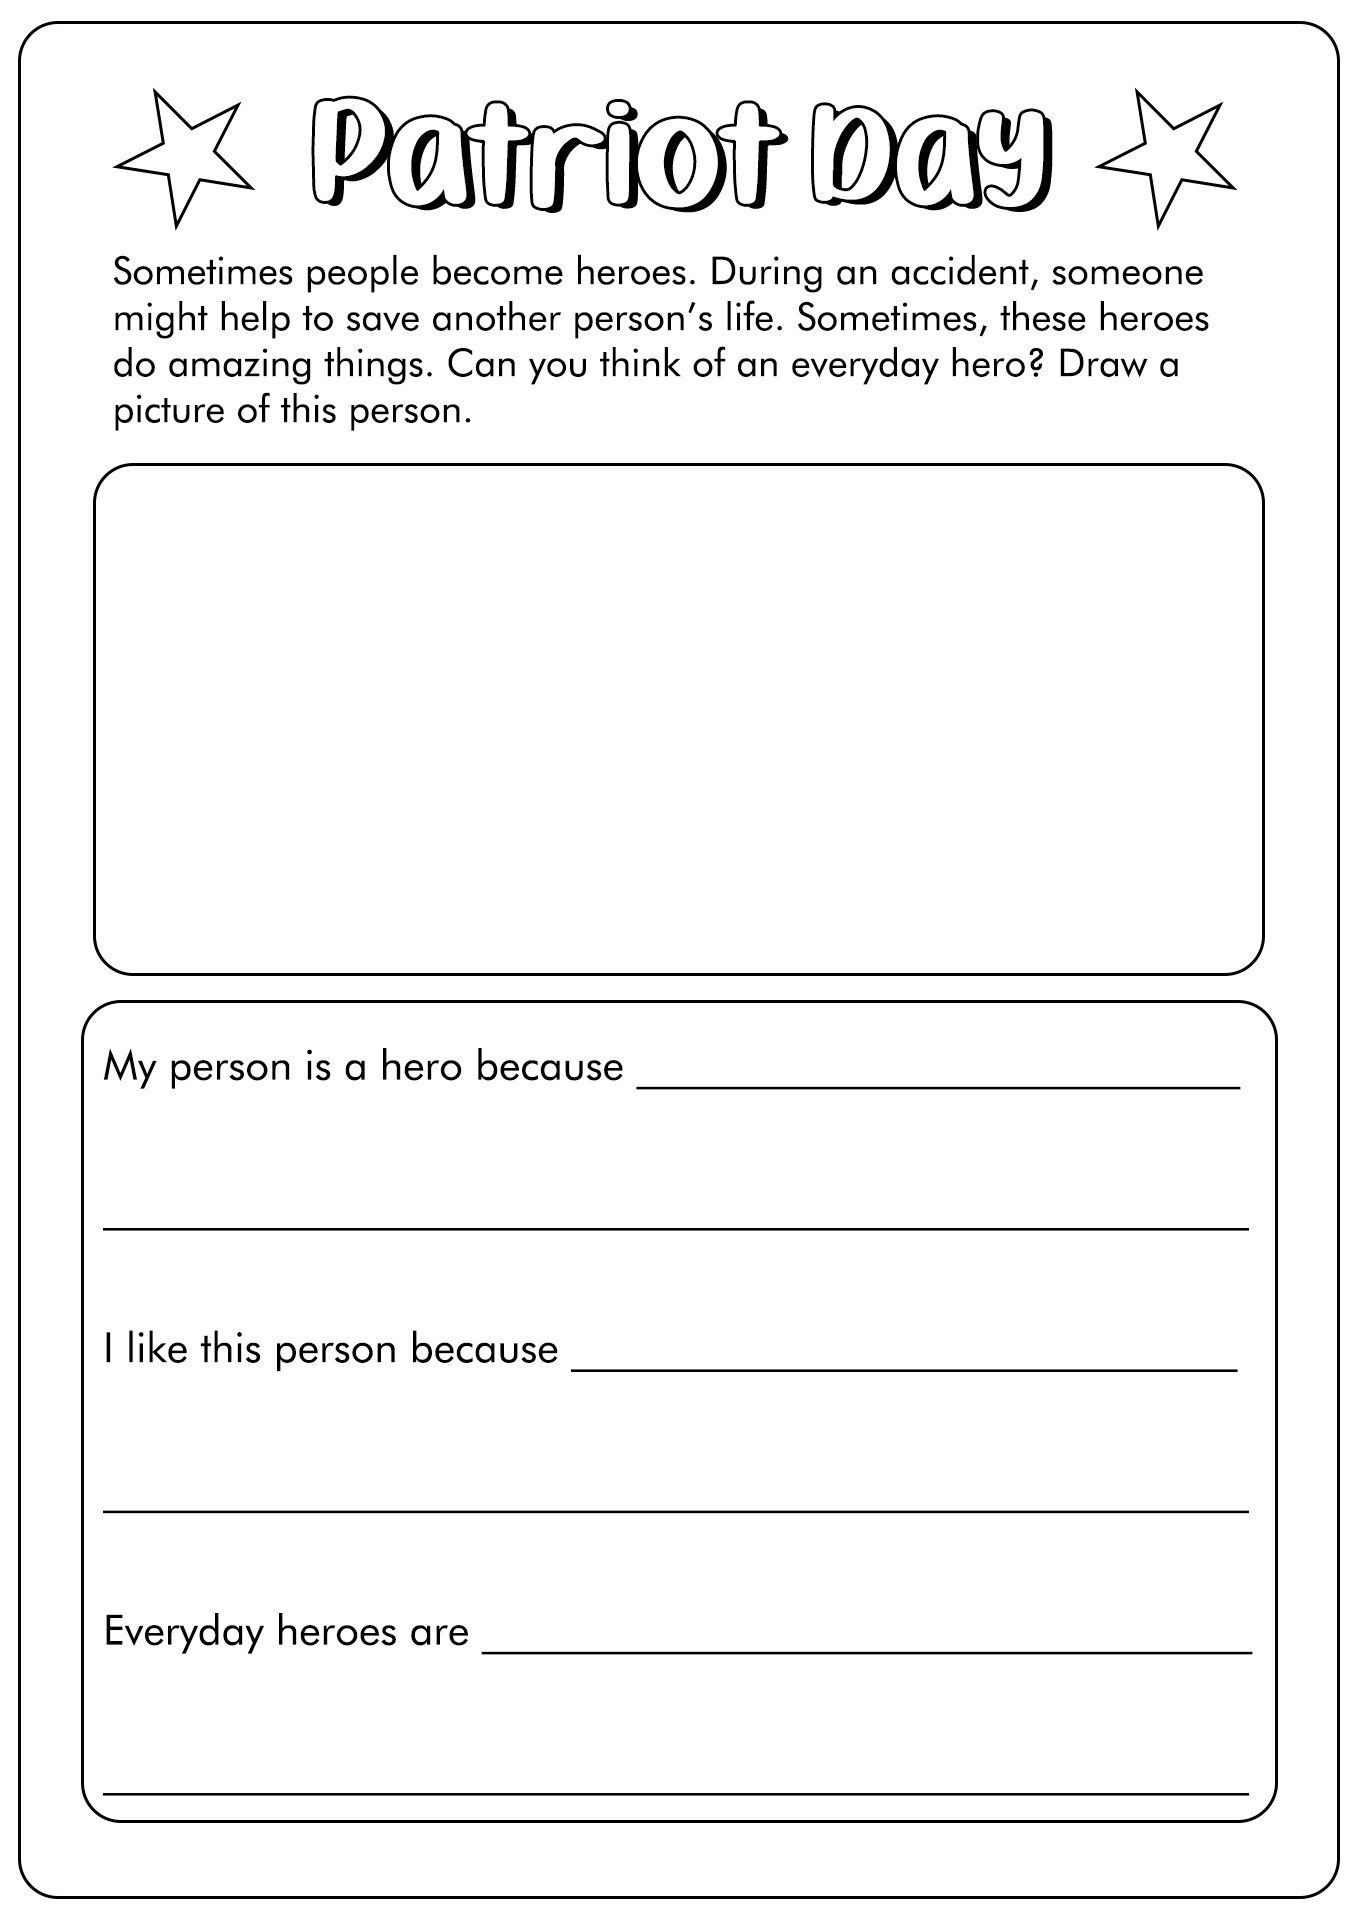 13-best-images-of-i-am-special-worksheets-activities-student-who-am-i-activity-9-11-student